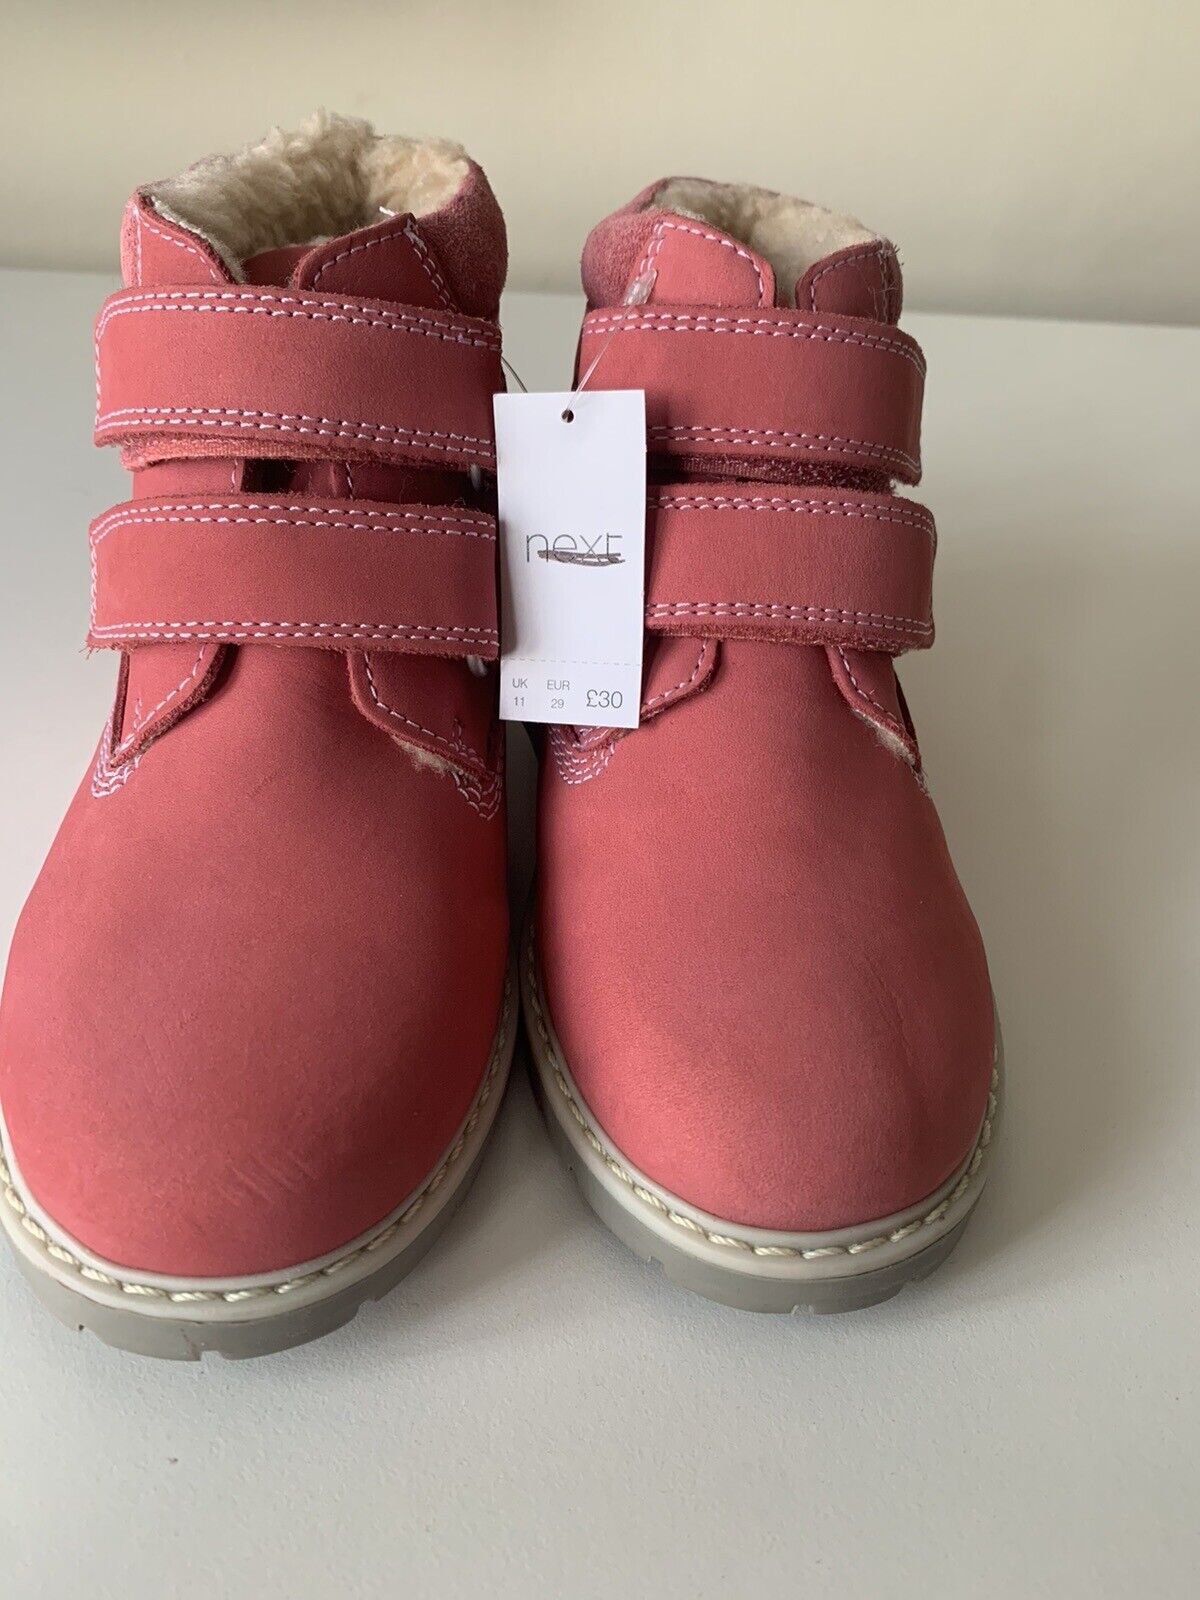 Girls Pink Fleece Lined Faux Fur Warm Winter Ankle Boots Shoes 8 or 11 RRP £30